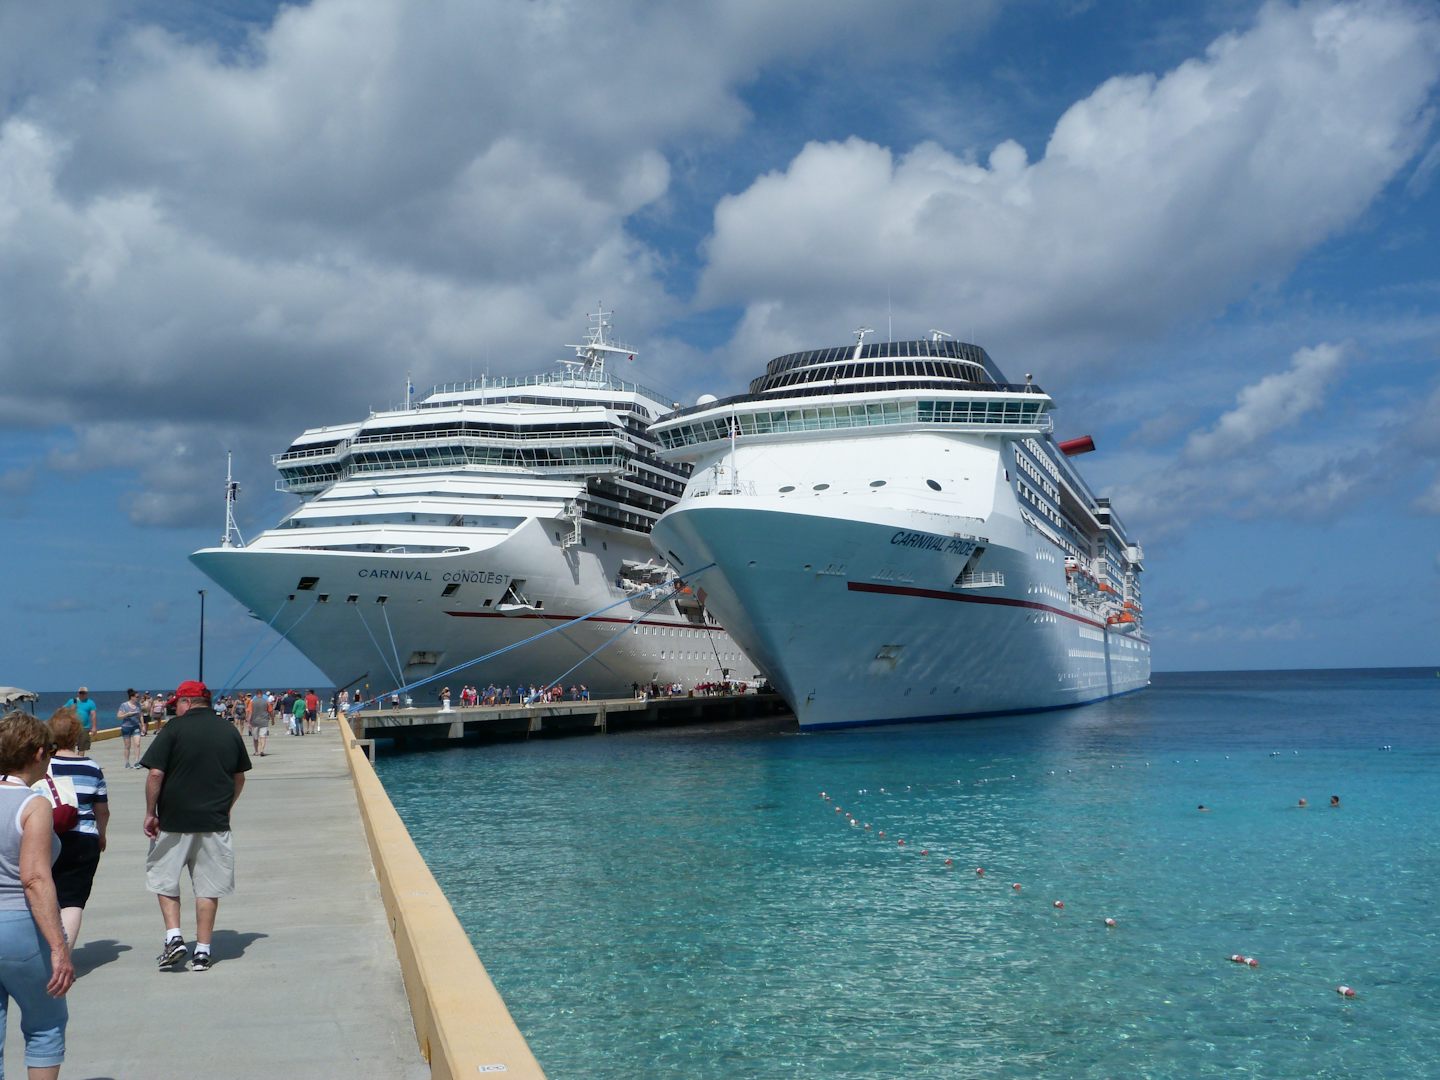 The Pride and Conquest at Grand Turk